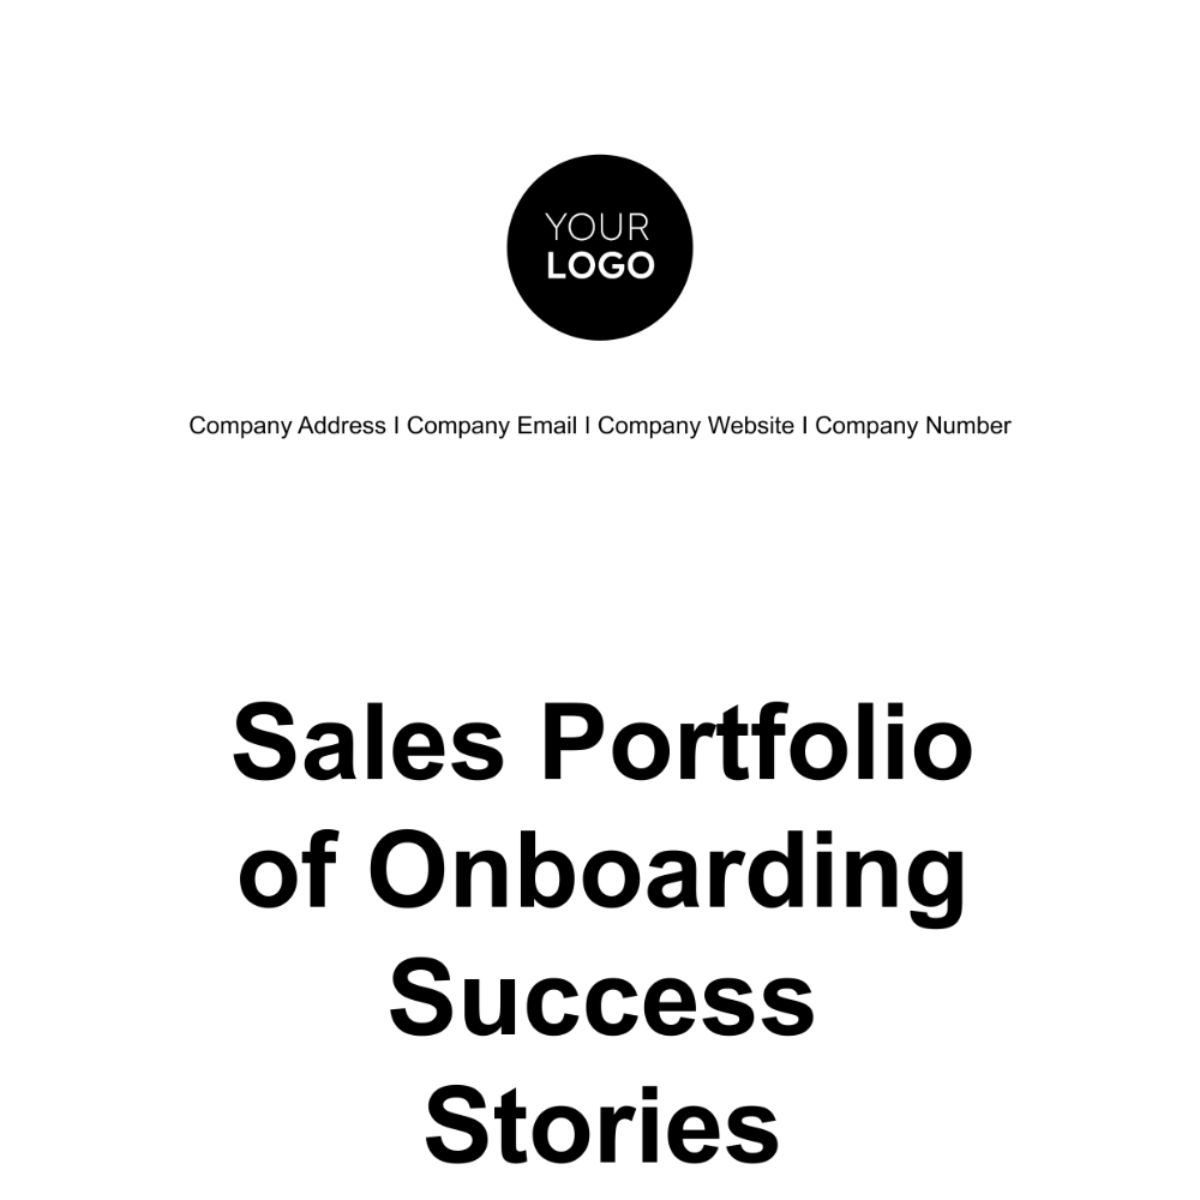 Free Sales Portfolio of Onboarding Success Stories Template